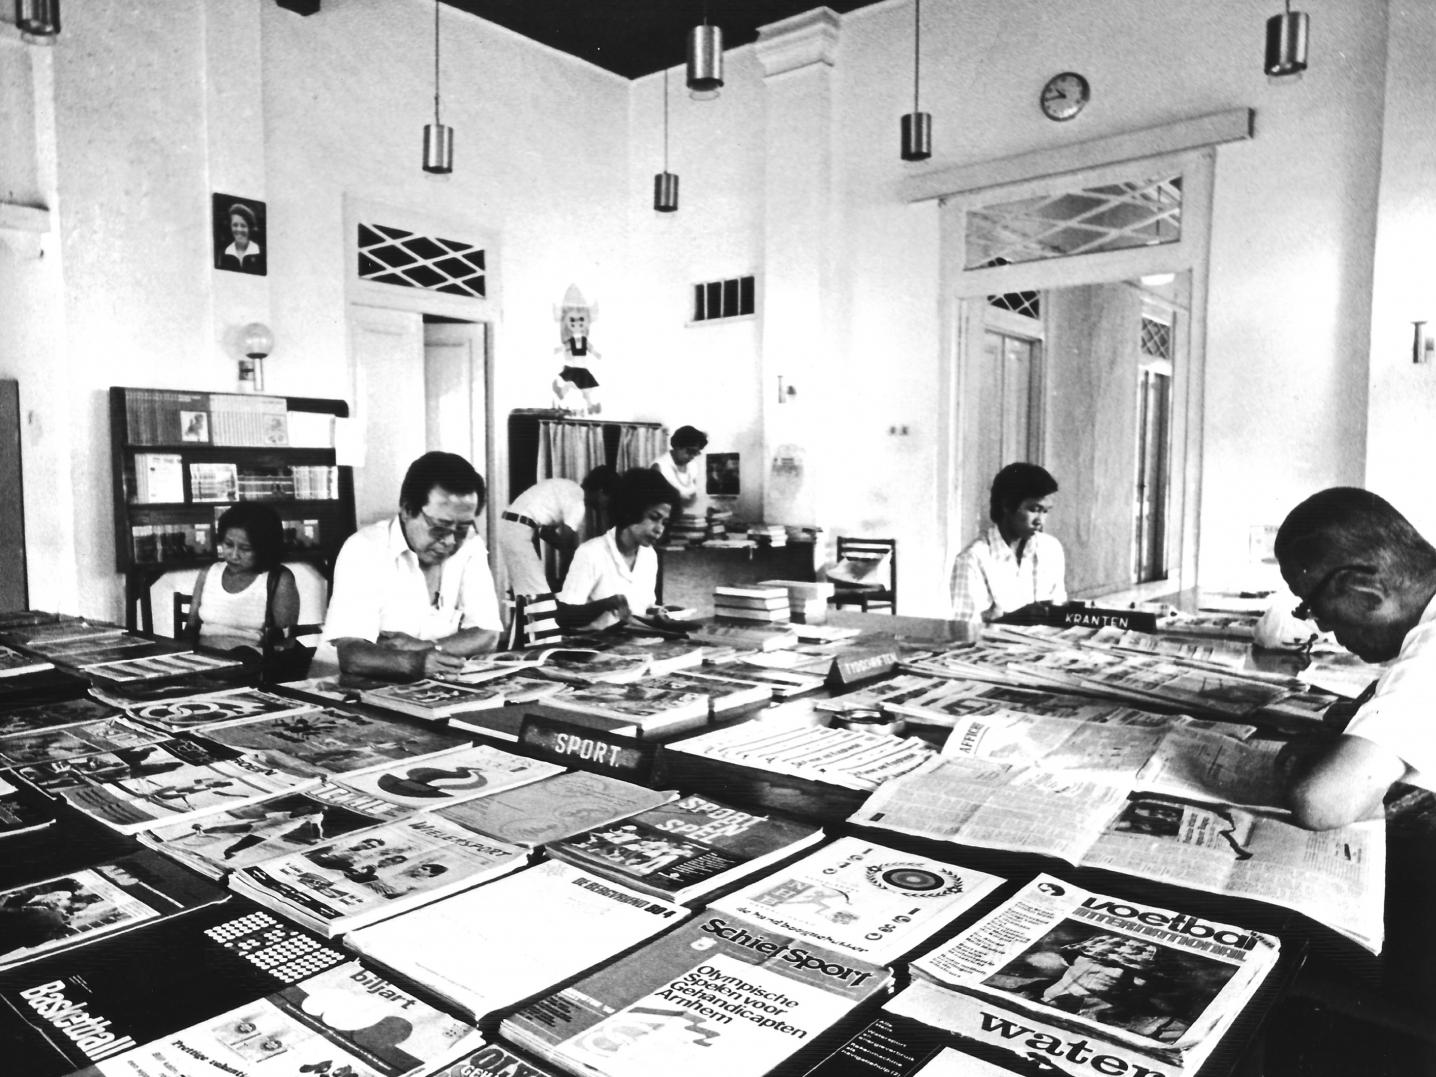 a 1970 photo of the reading room of the former Erasmus Huis, Jakarta